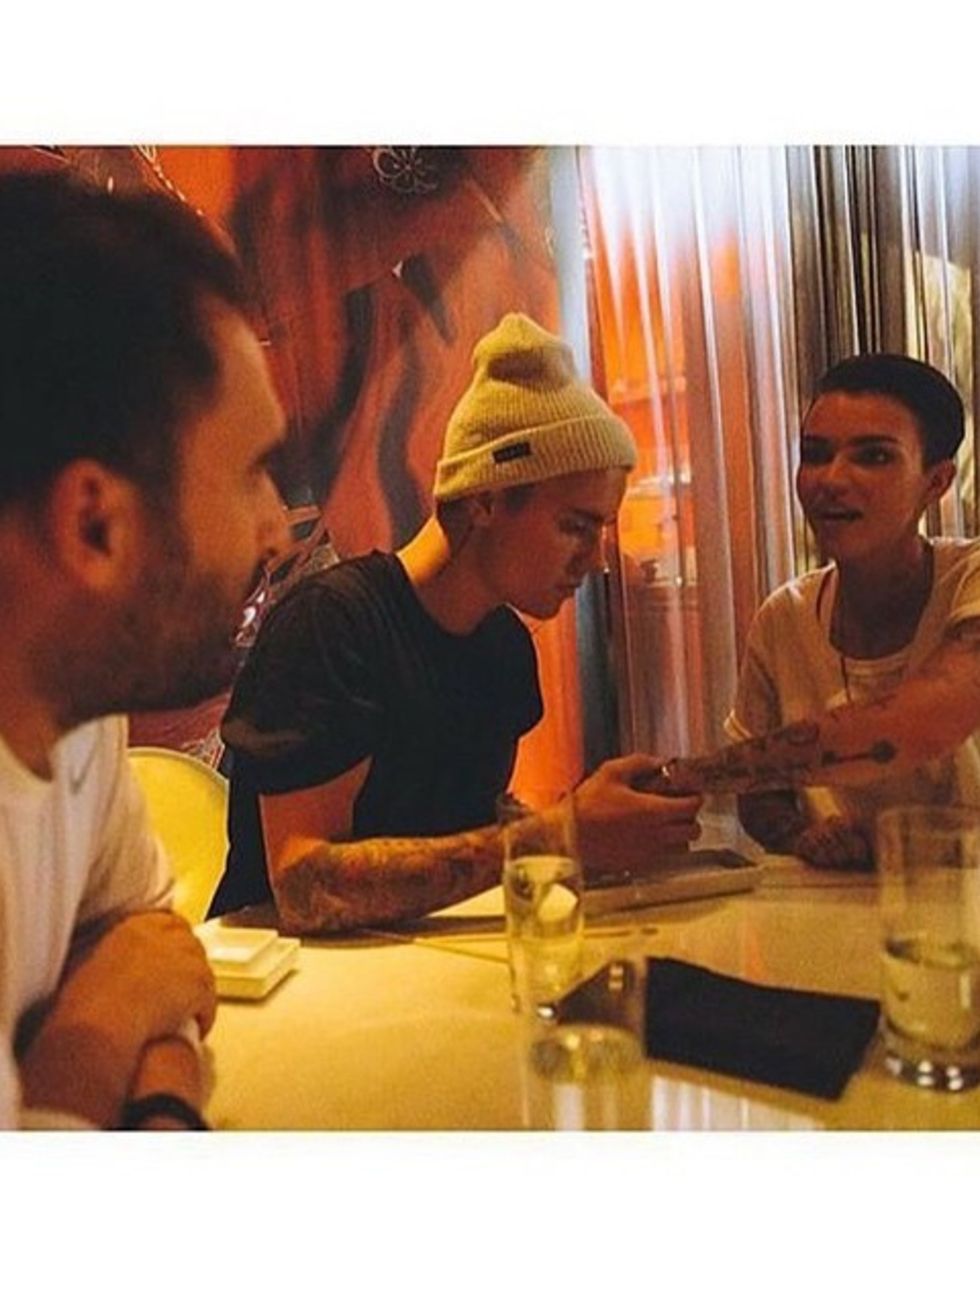 <p>Ruby Rose and Justin Bieber</p>

<p>We don't know how this happened, but we like it. And not just because they look surprisingly similar. Ruby Rose posted this pic on Instagram with the caption 'I have so much time for these two boys. @justinbieber @jo